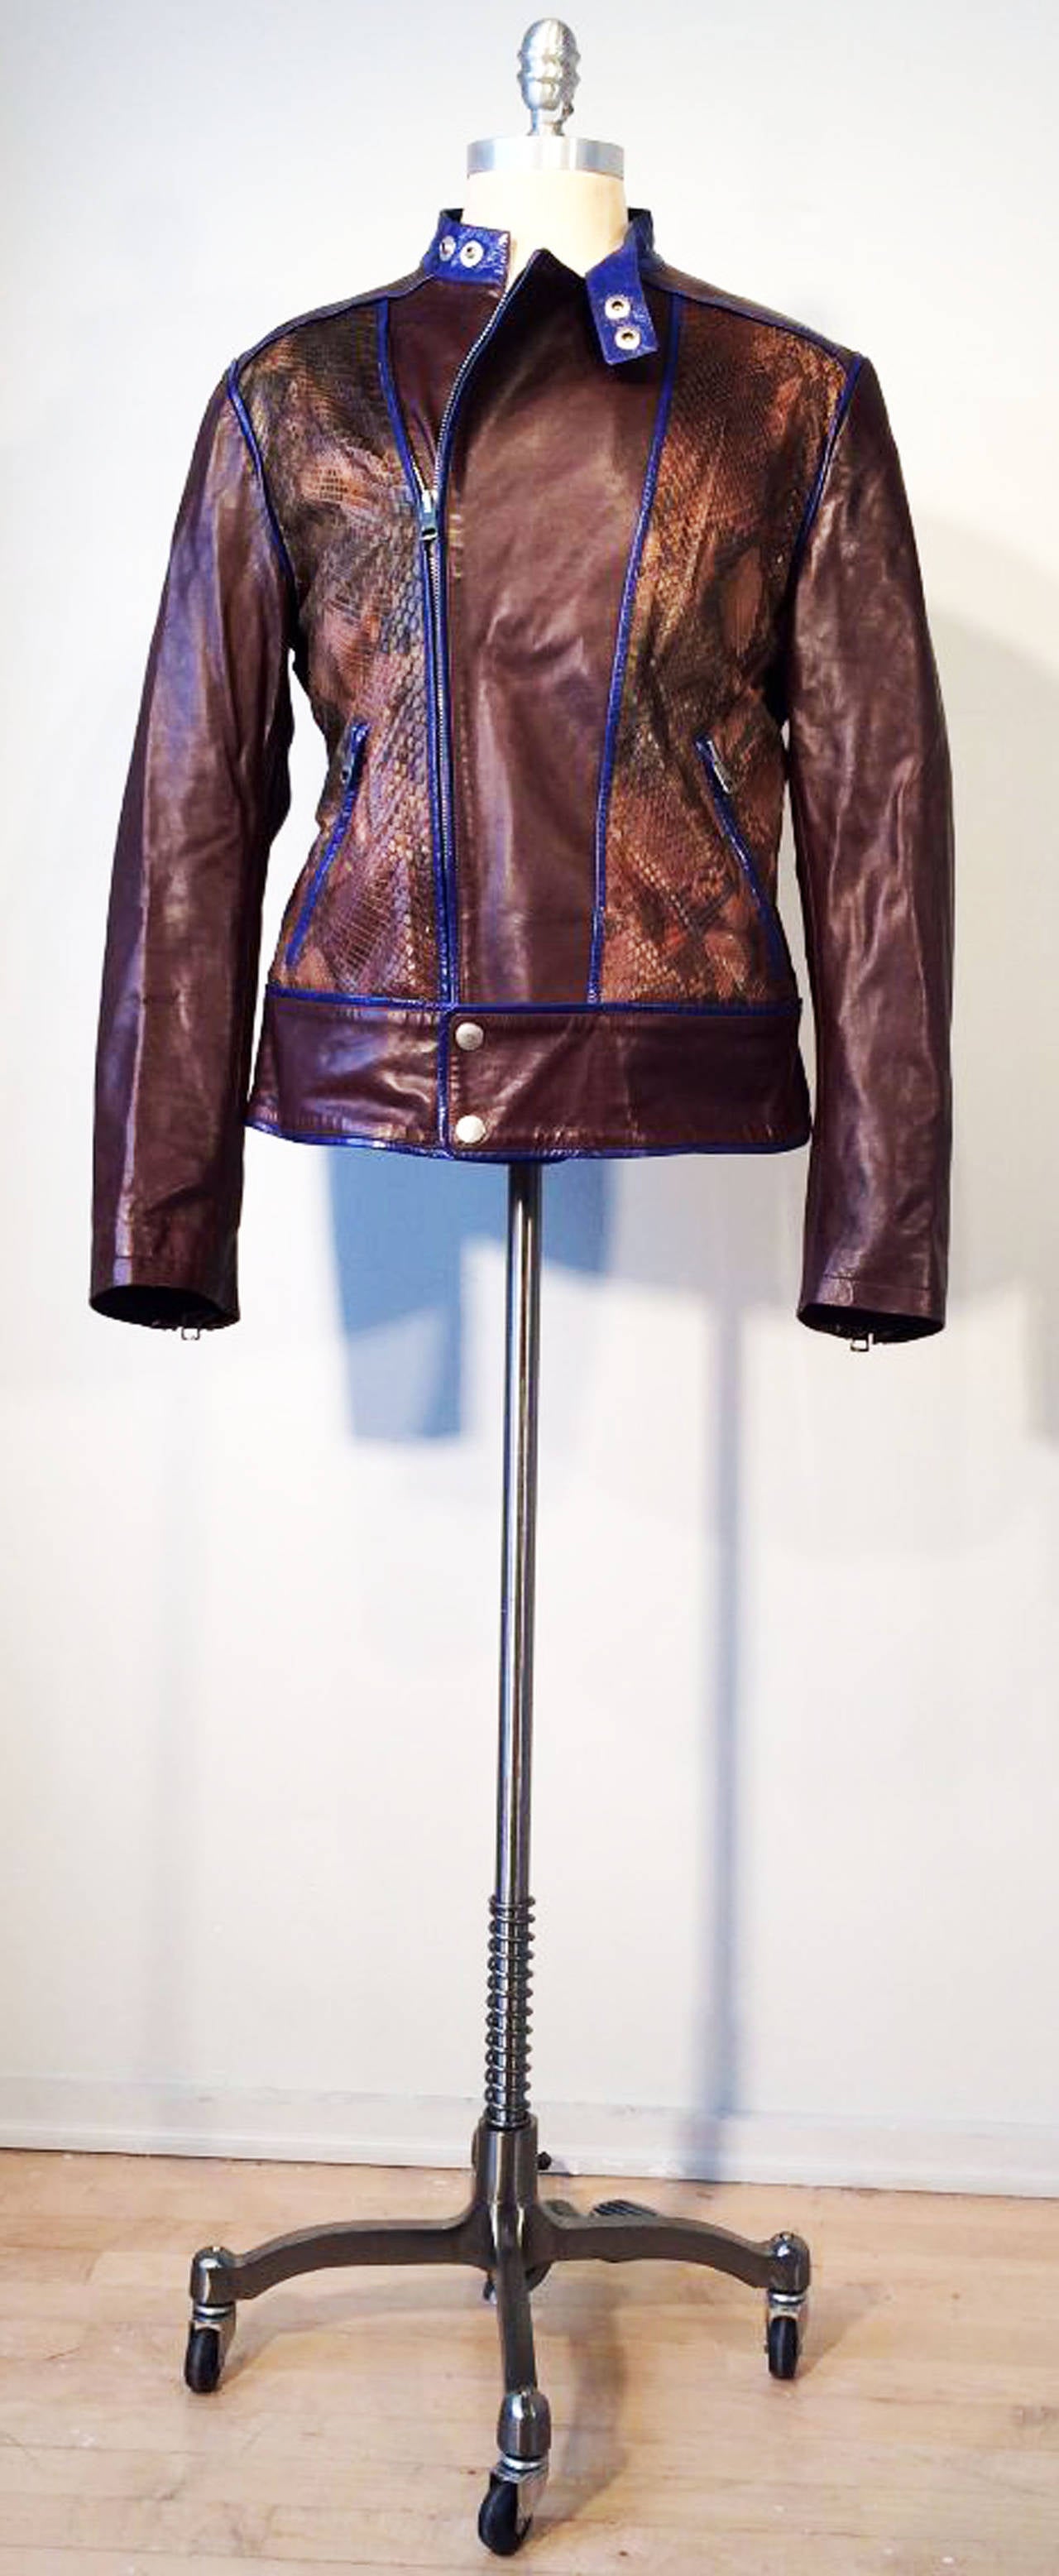 A rare Tom Ford for Gucci python cafe racer/biker jacket. Supple brown leather item features matching color python panels and contrasting electric blue leather trim. Item fully lined with both zipper and snap closures. Pristine appears unworn.